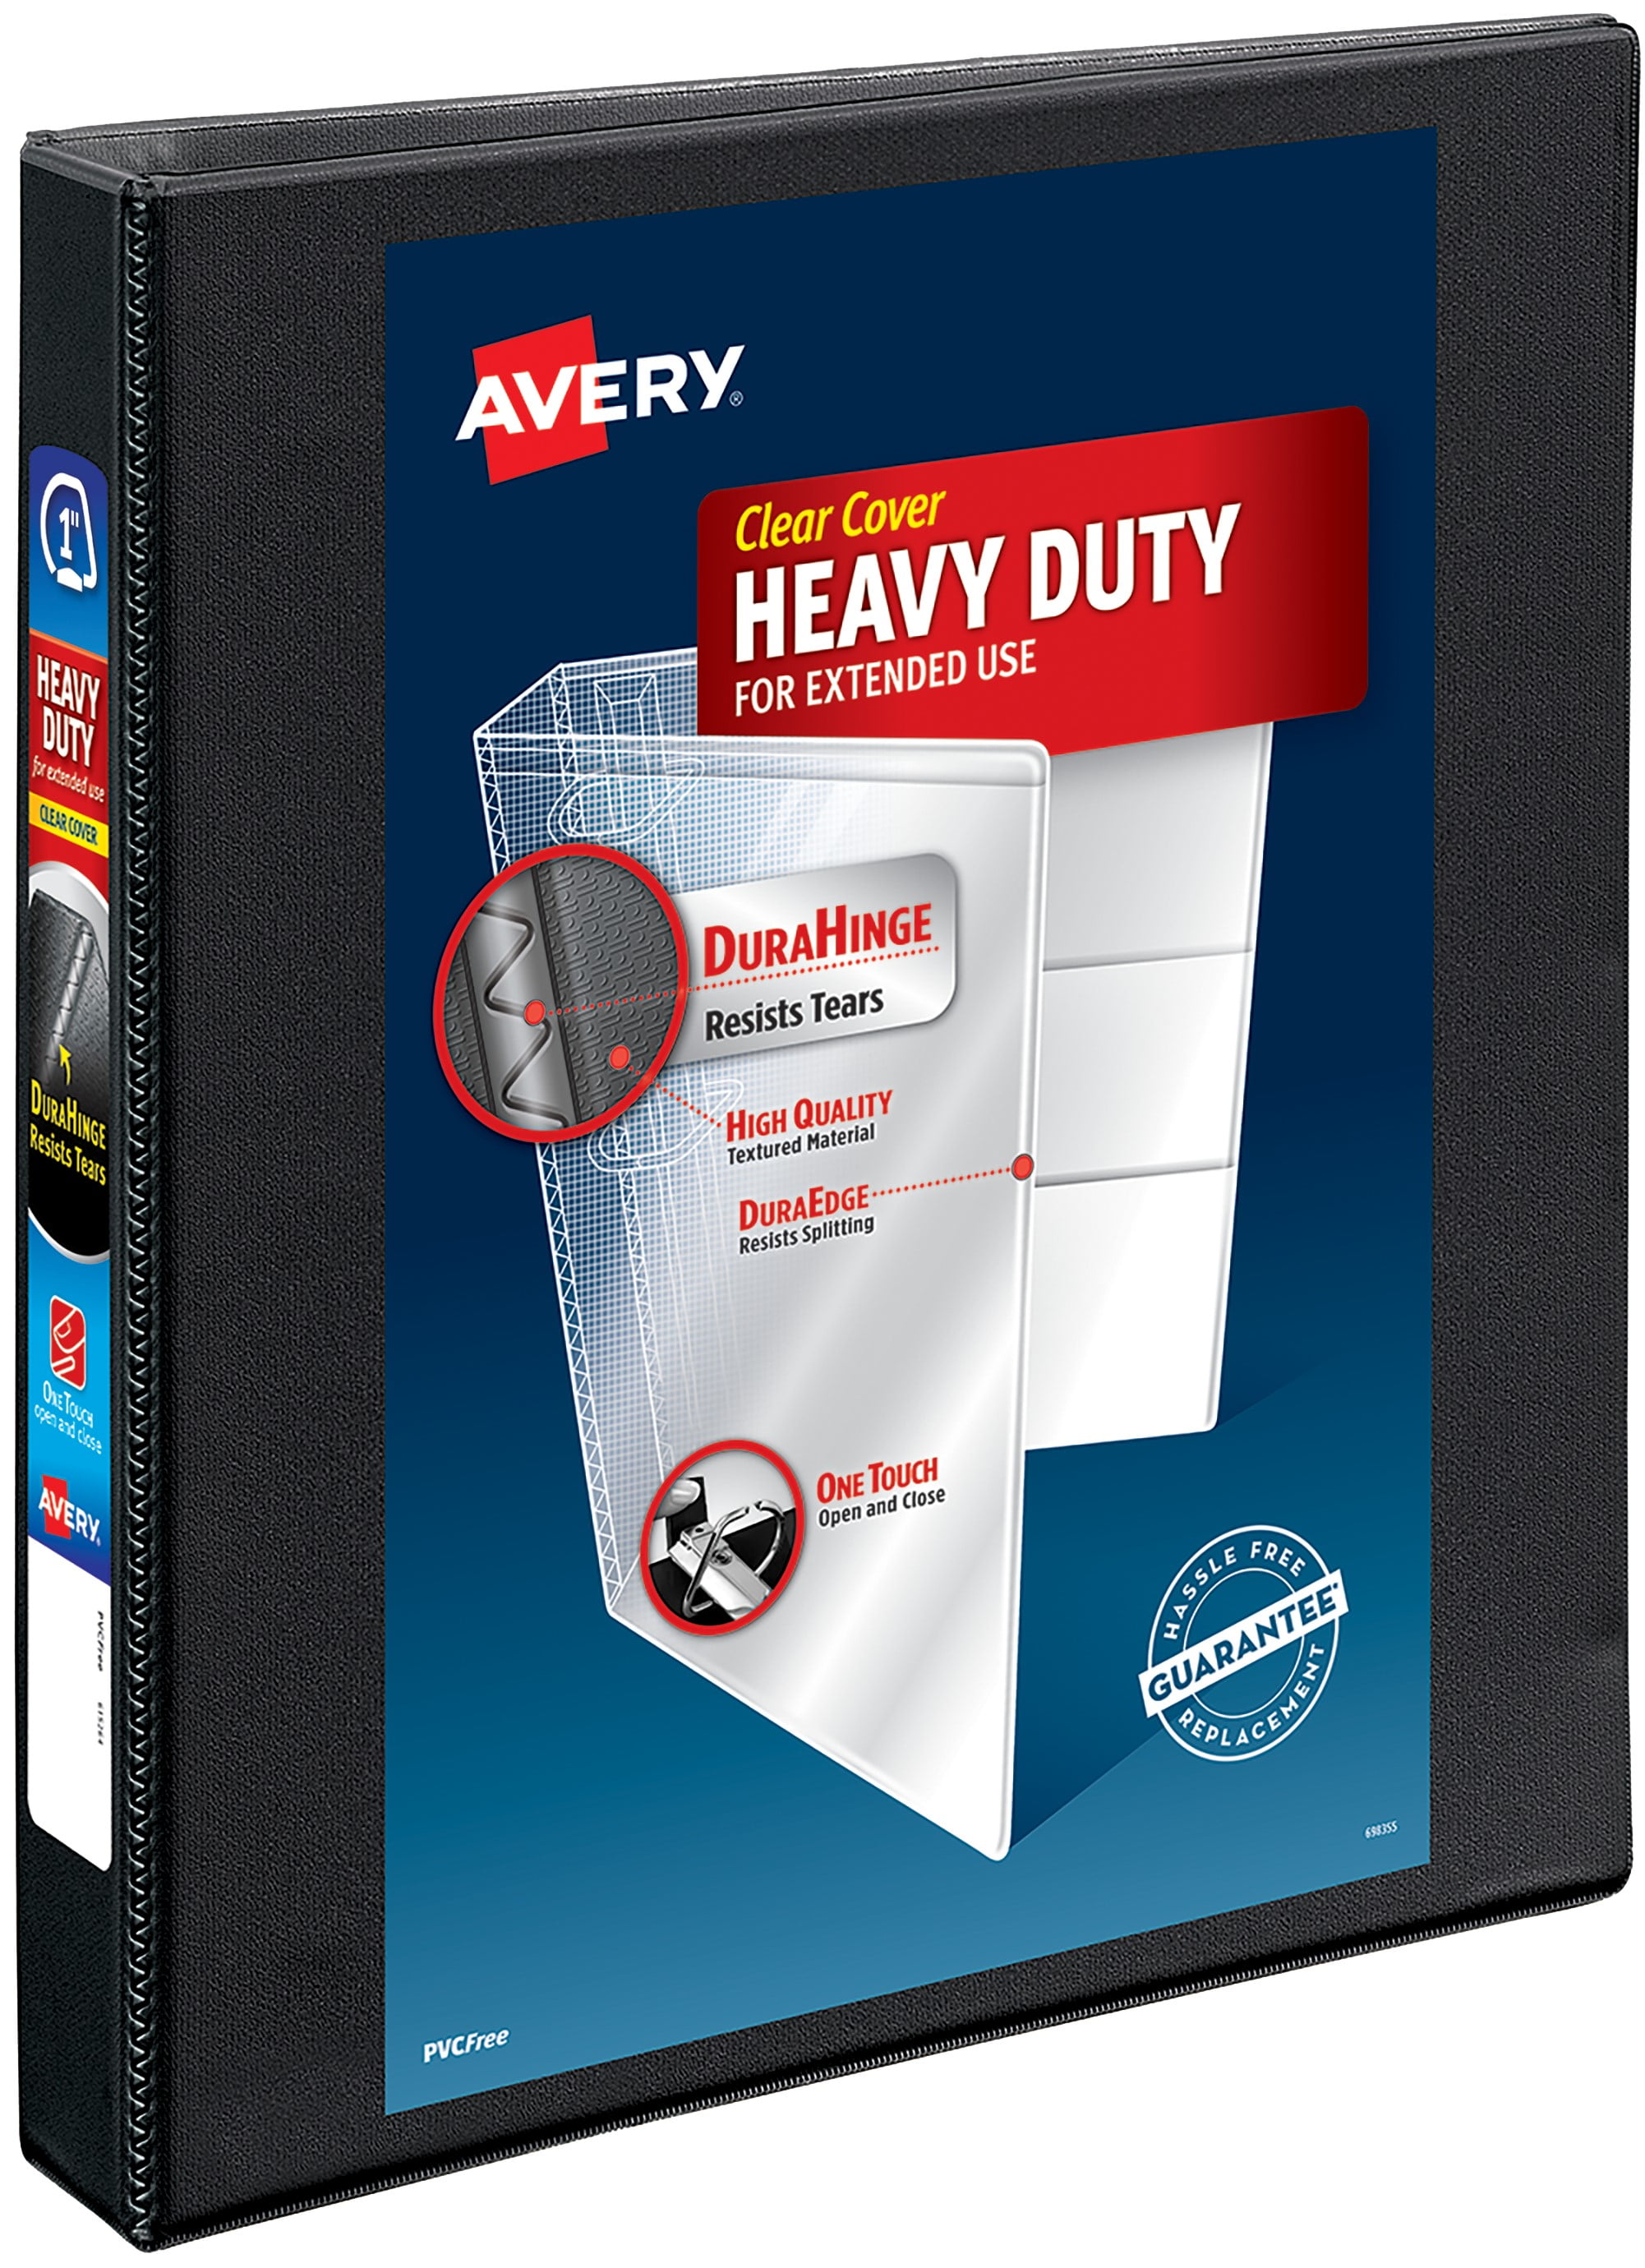 Avery Heavy Duty View Binder, Black, 1-Inch, Slant Ring, One-Touch, 250 Sheets (79137)